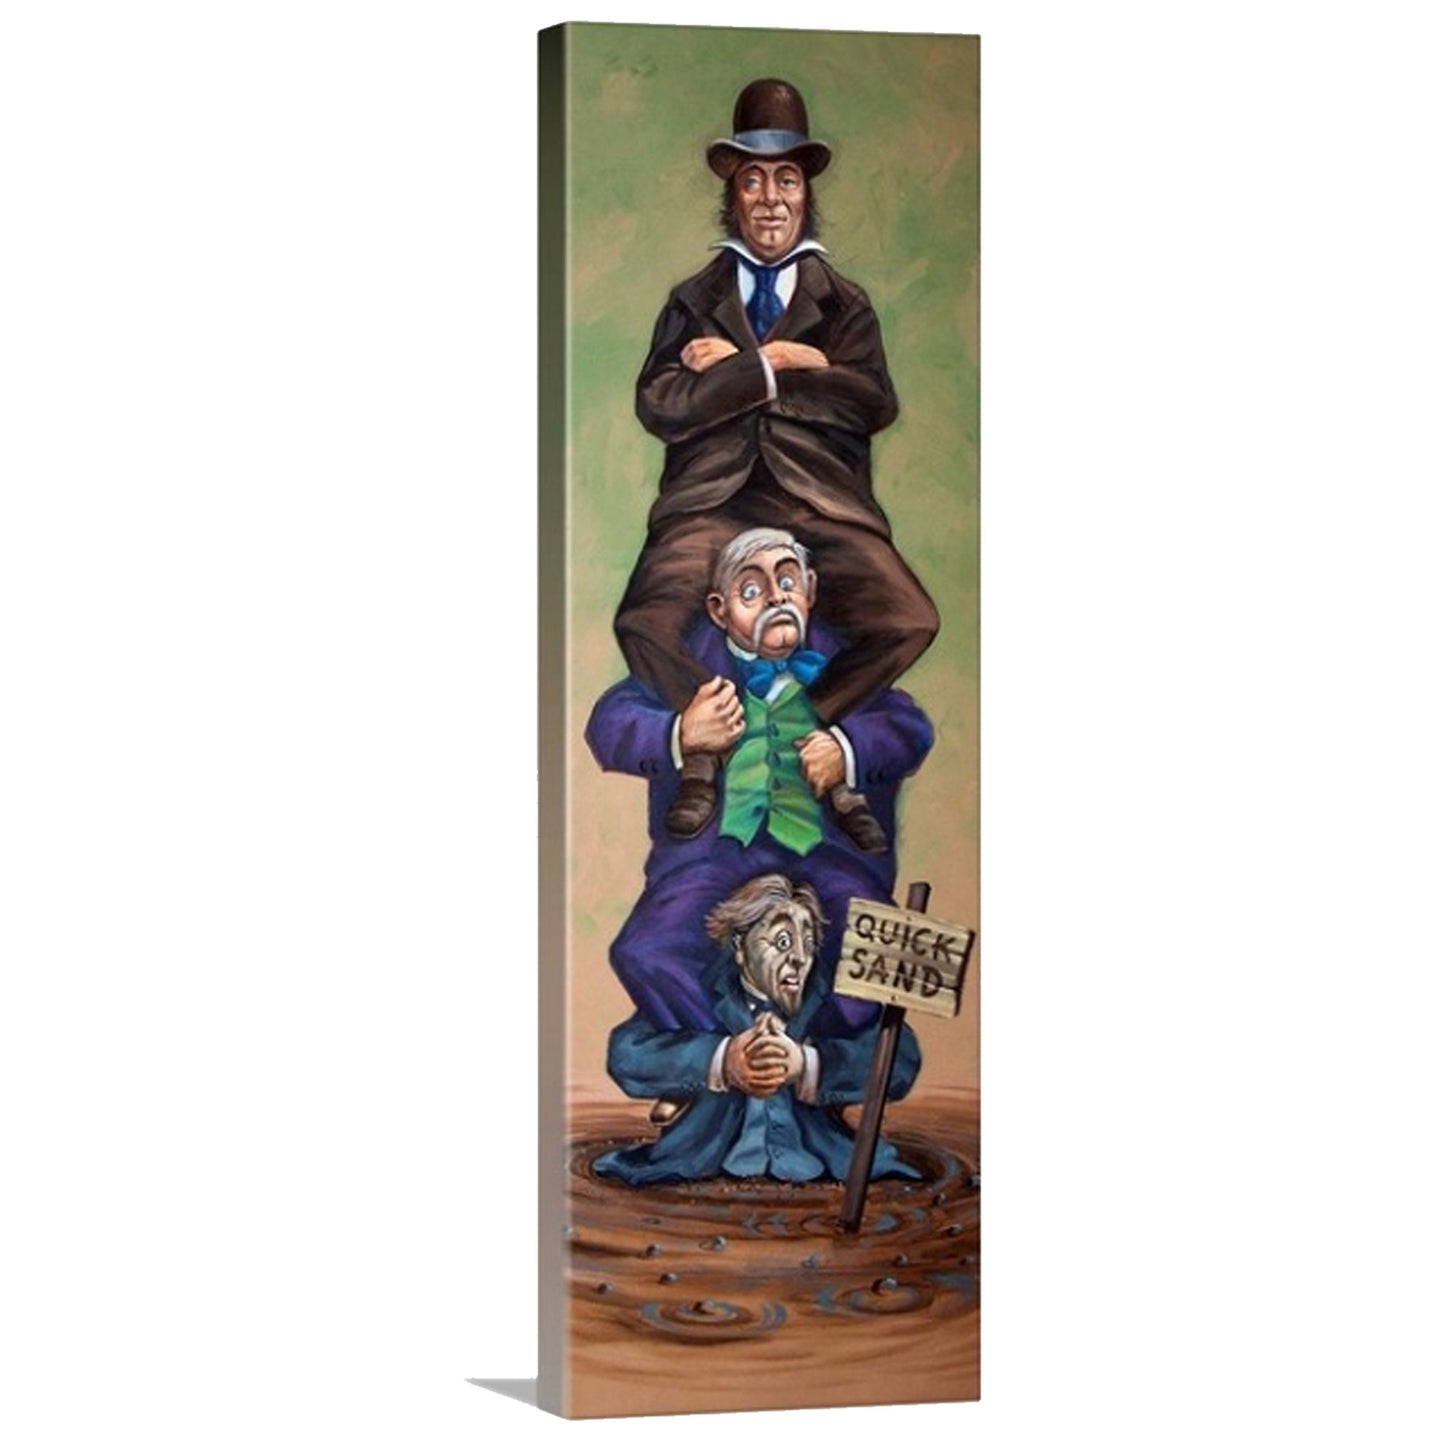 18"x24" Haunted Mansion Stretch Portrait Canvas - Haunted Mansion Inspired Stretching Paintings